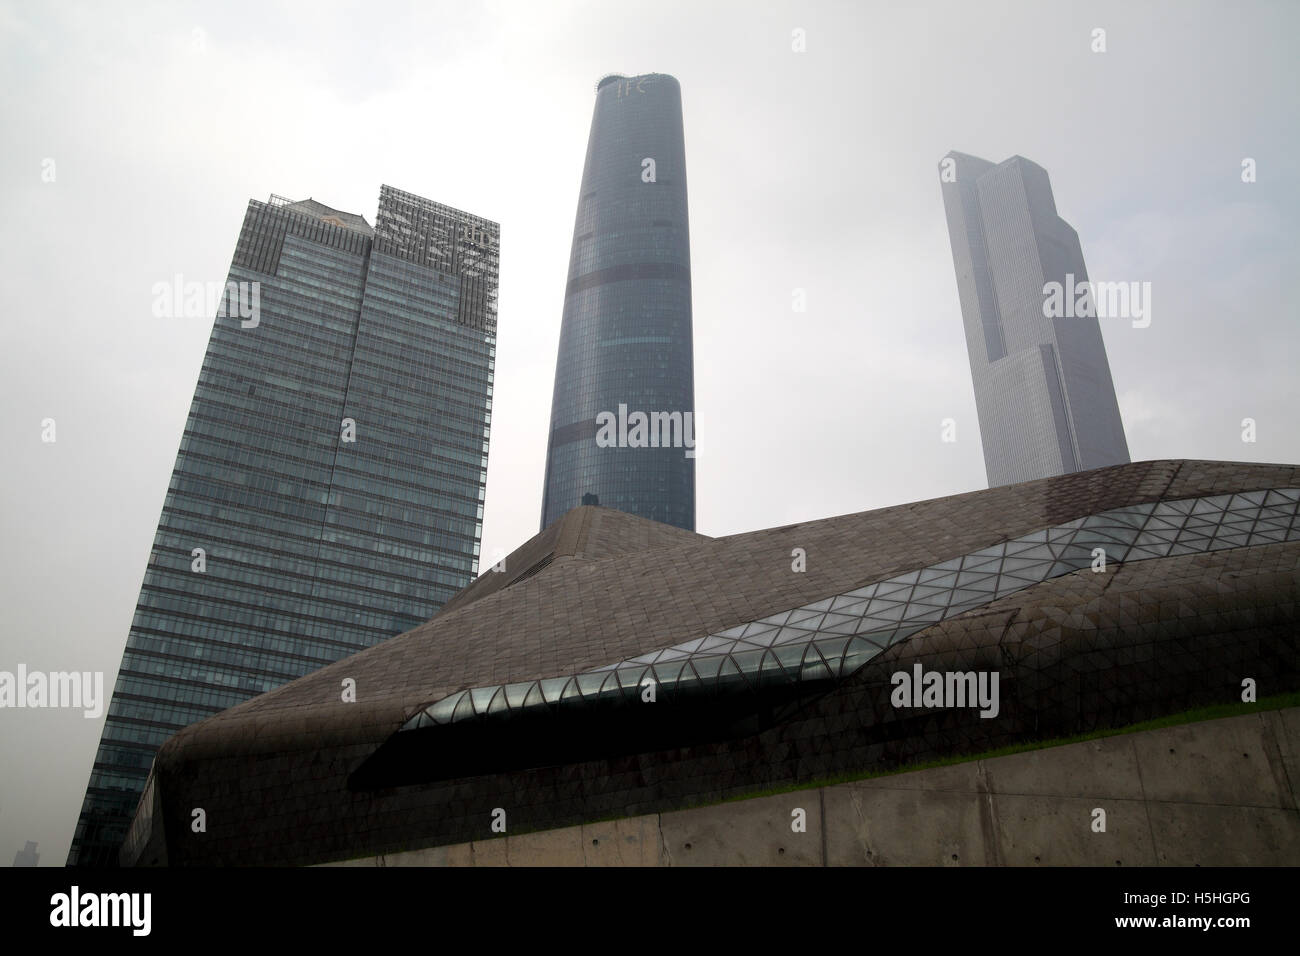 The top part of the Guangzhou Opera House designed by Zaha Hadid and three commercial high rise builldings behind it. Guangzhou. Stock Photo